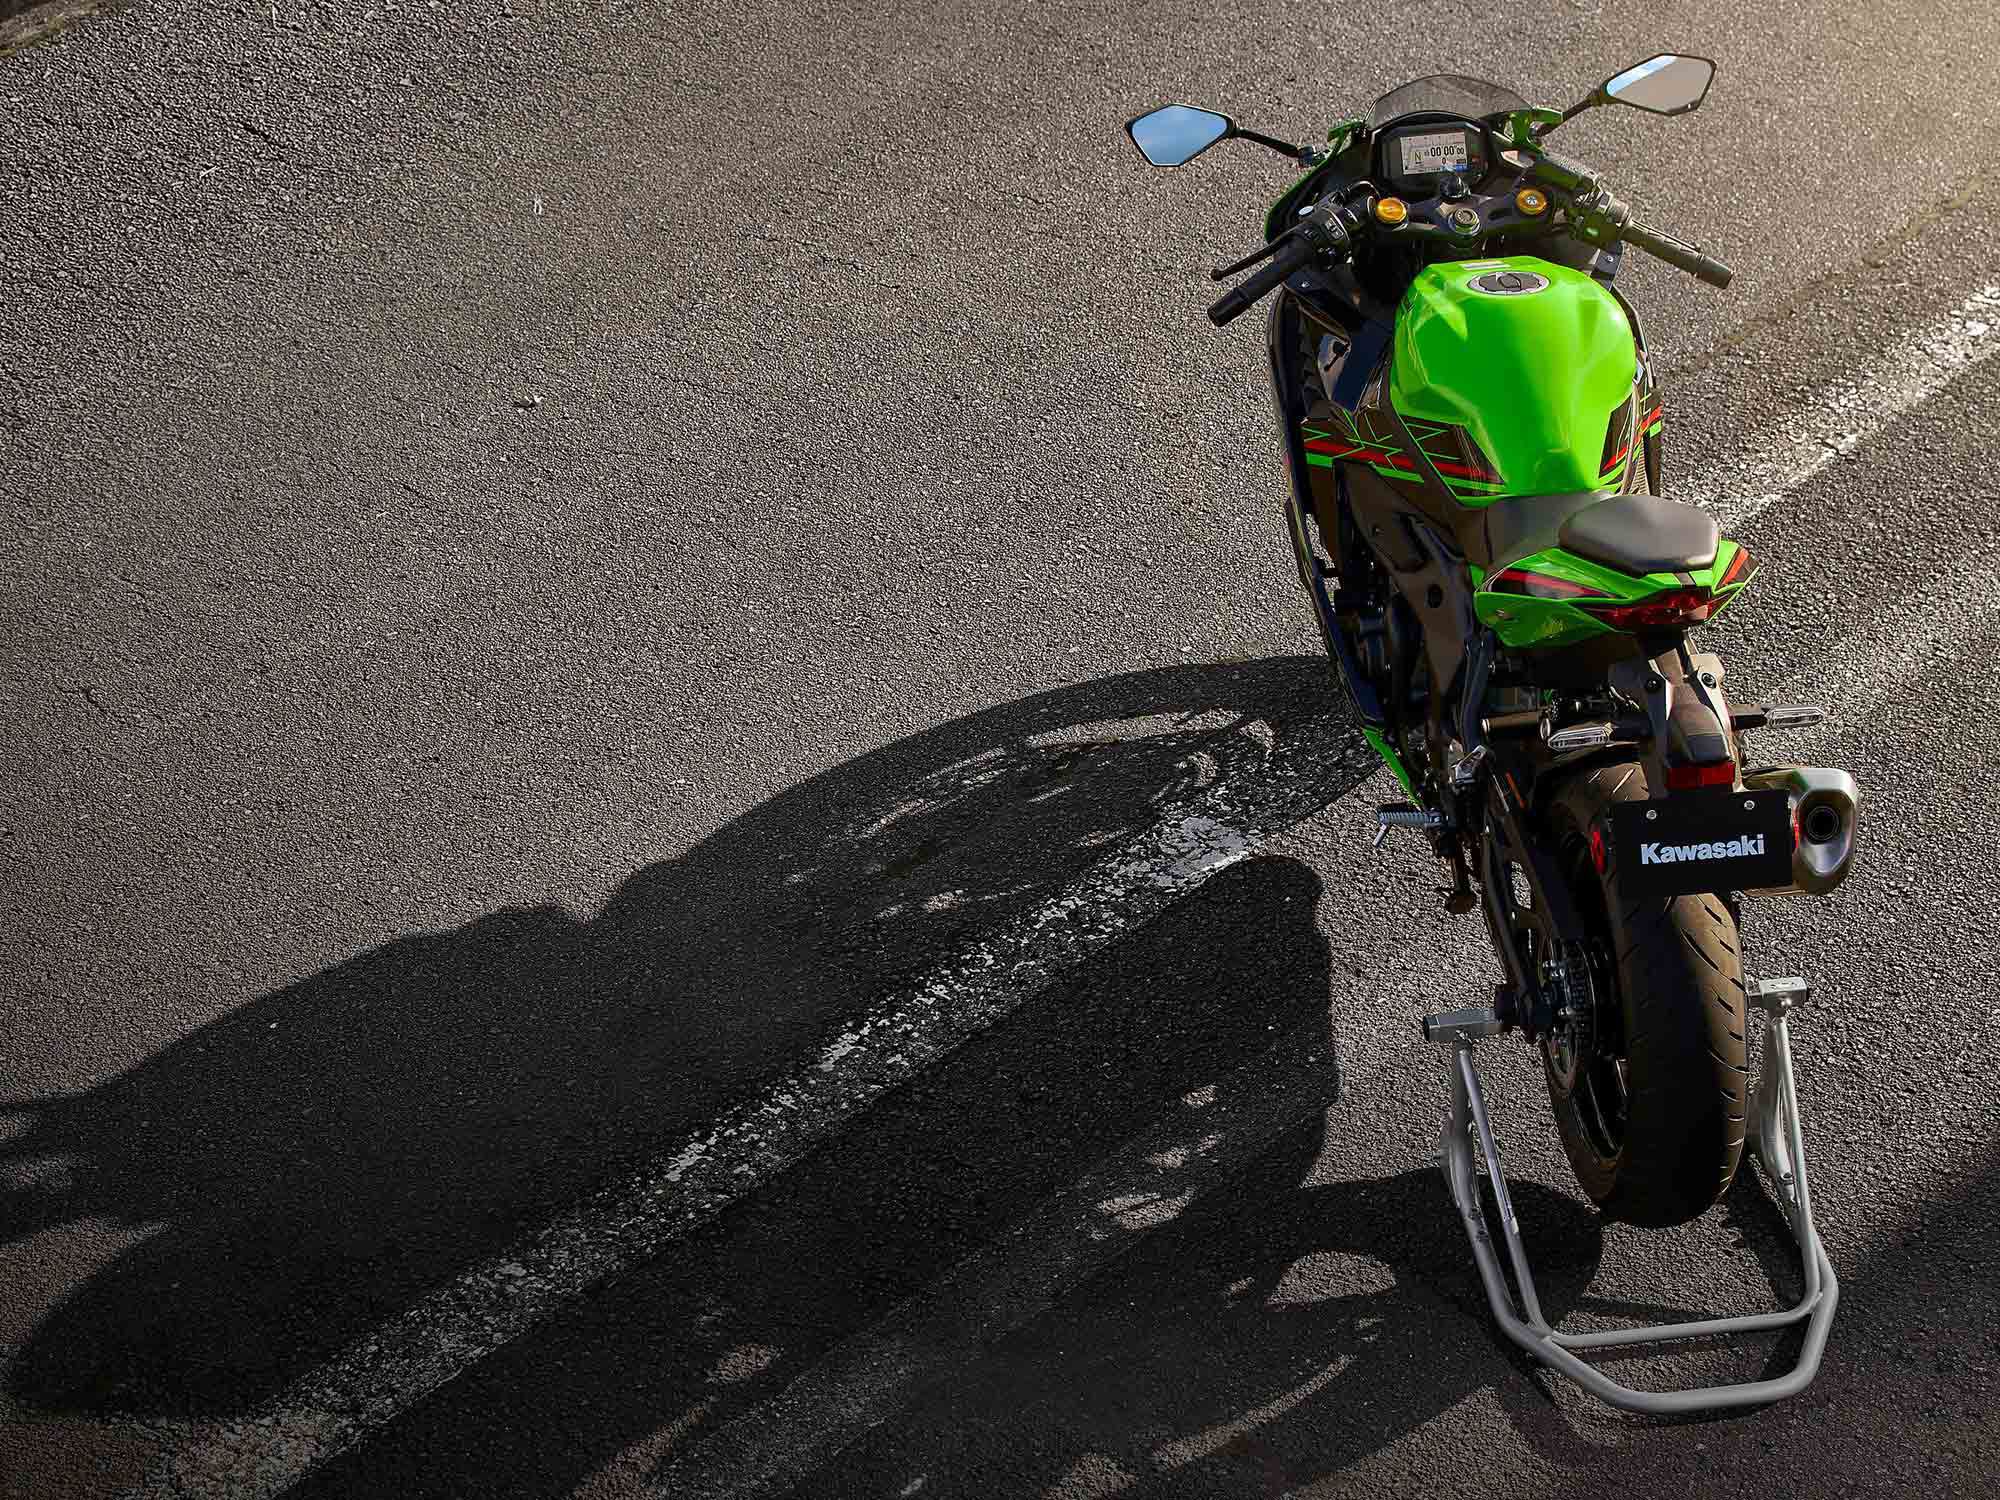 The Kawasaki Ninja ZX-4RR KRT Edition weighs 414.5 pounds with its 4.0-gallon fuel tank topped off.